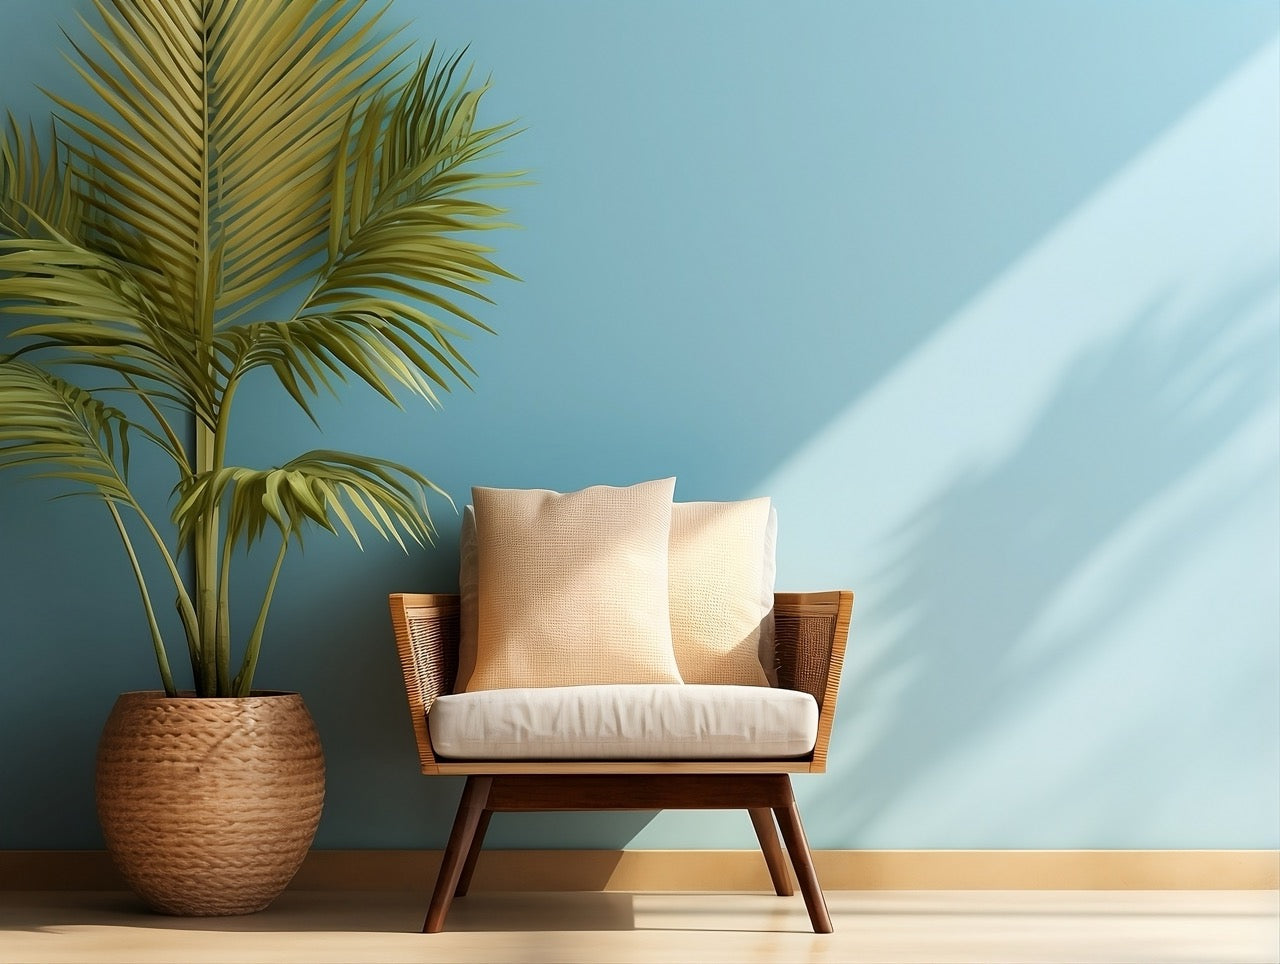 Freshen Up: Quick and Easy Summer Decor Tips for Your Home